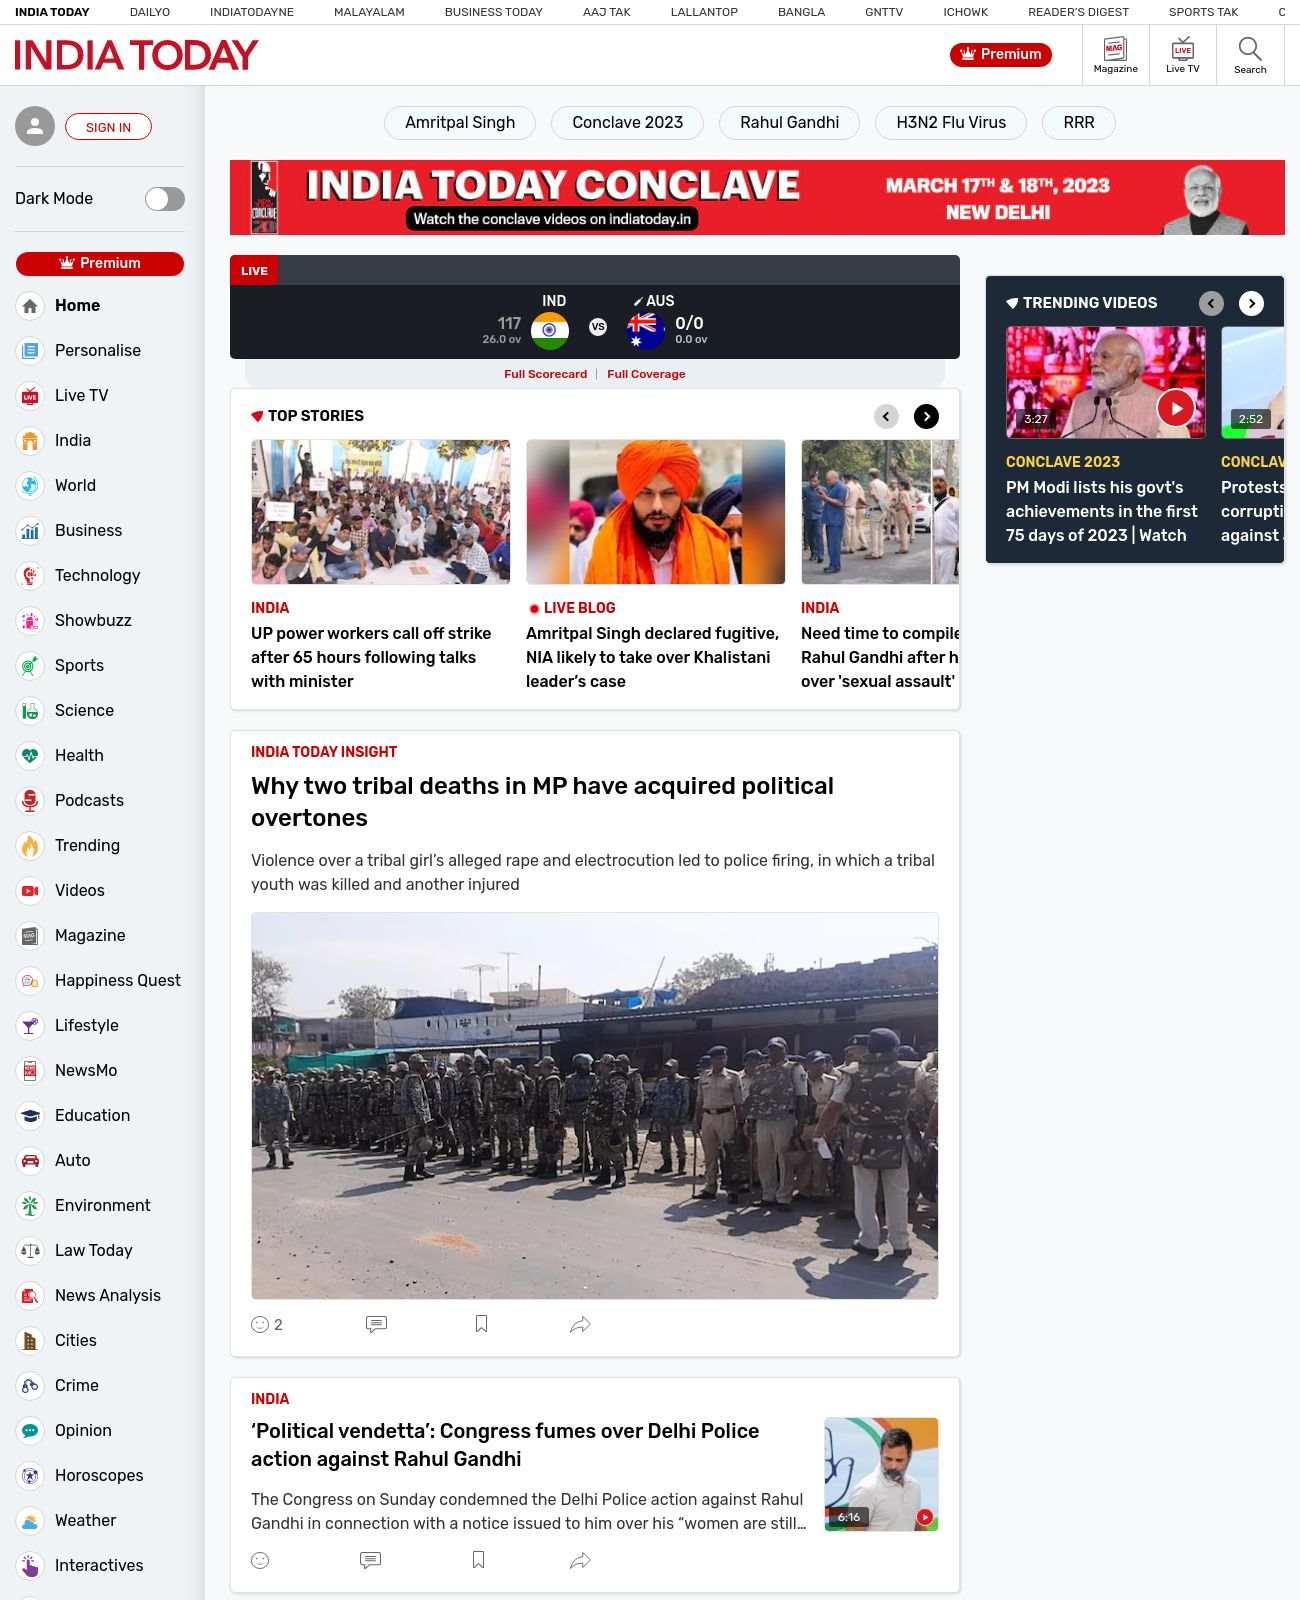 India Today at 2023-03-19 16:46:46+05:30 local time